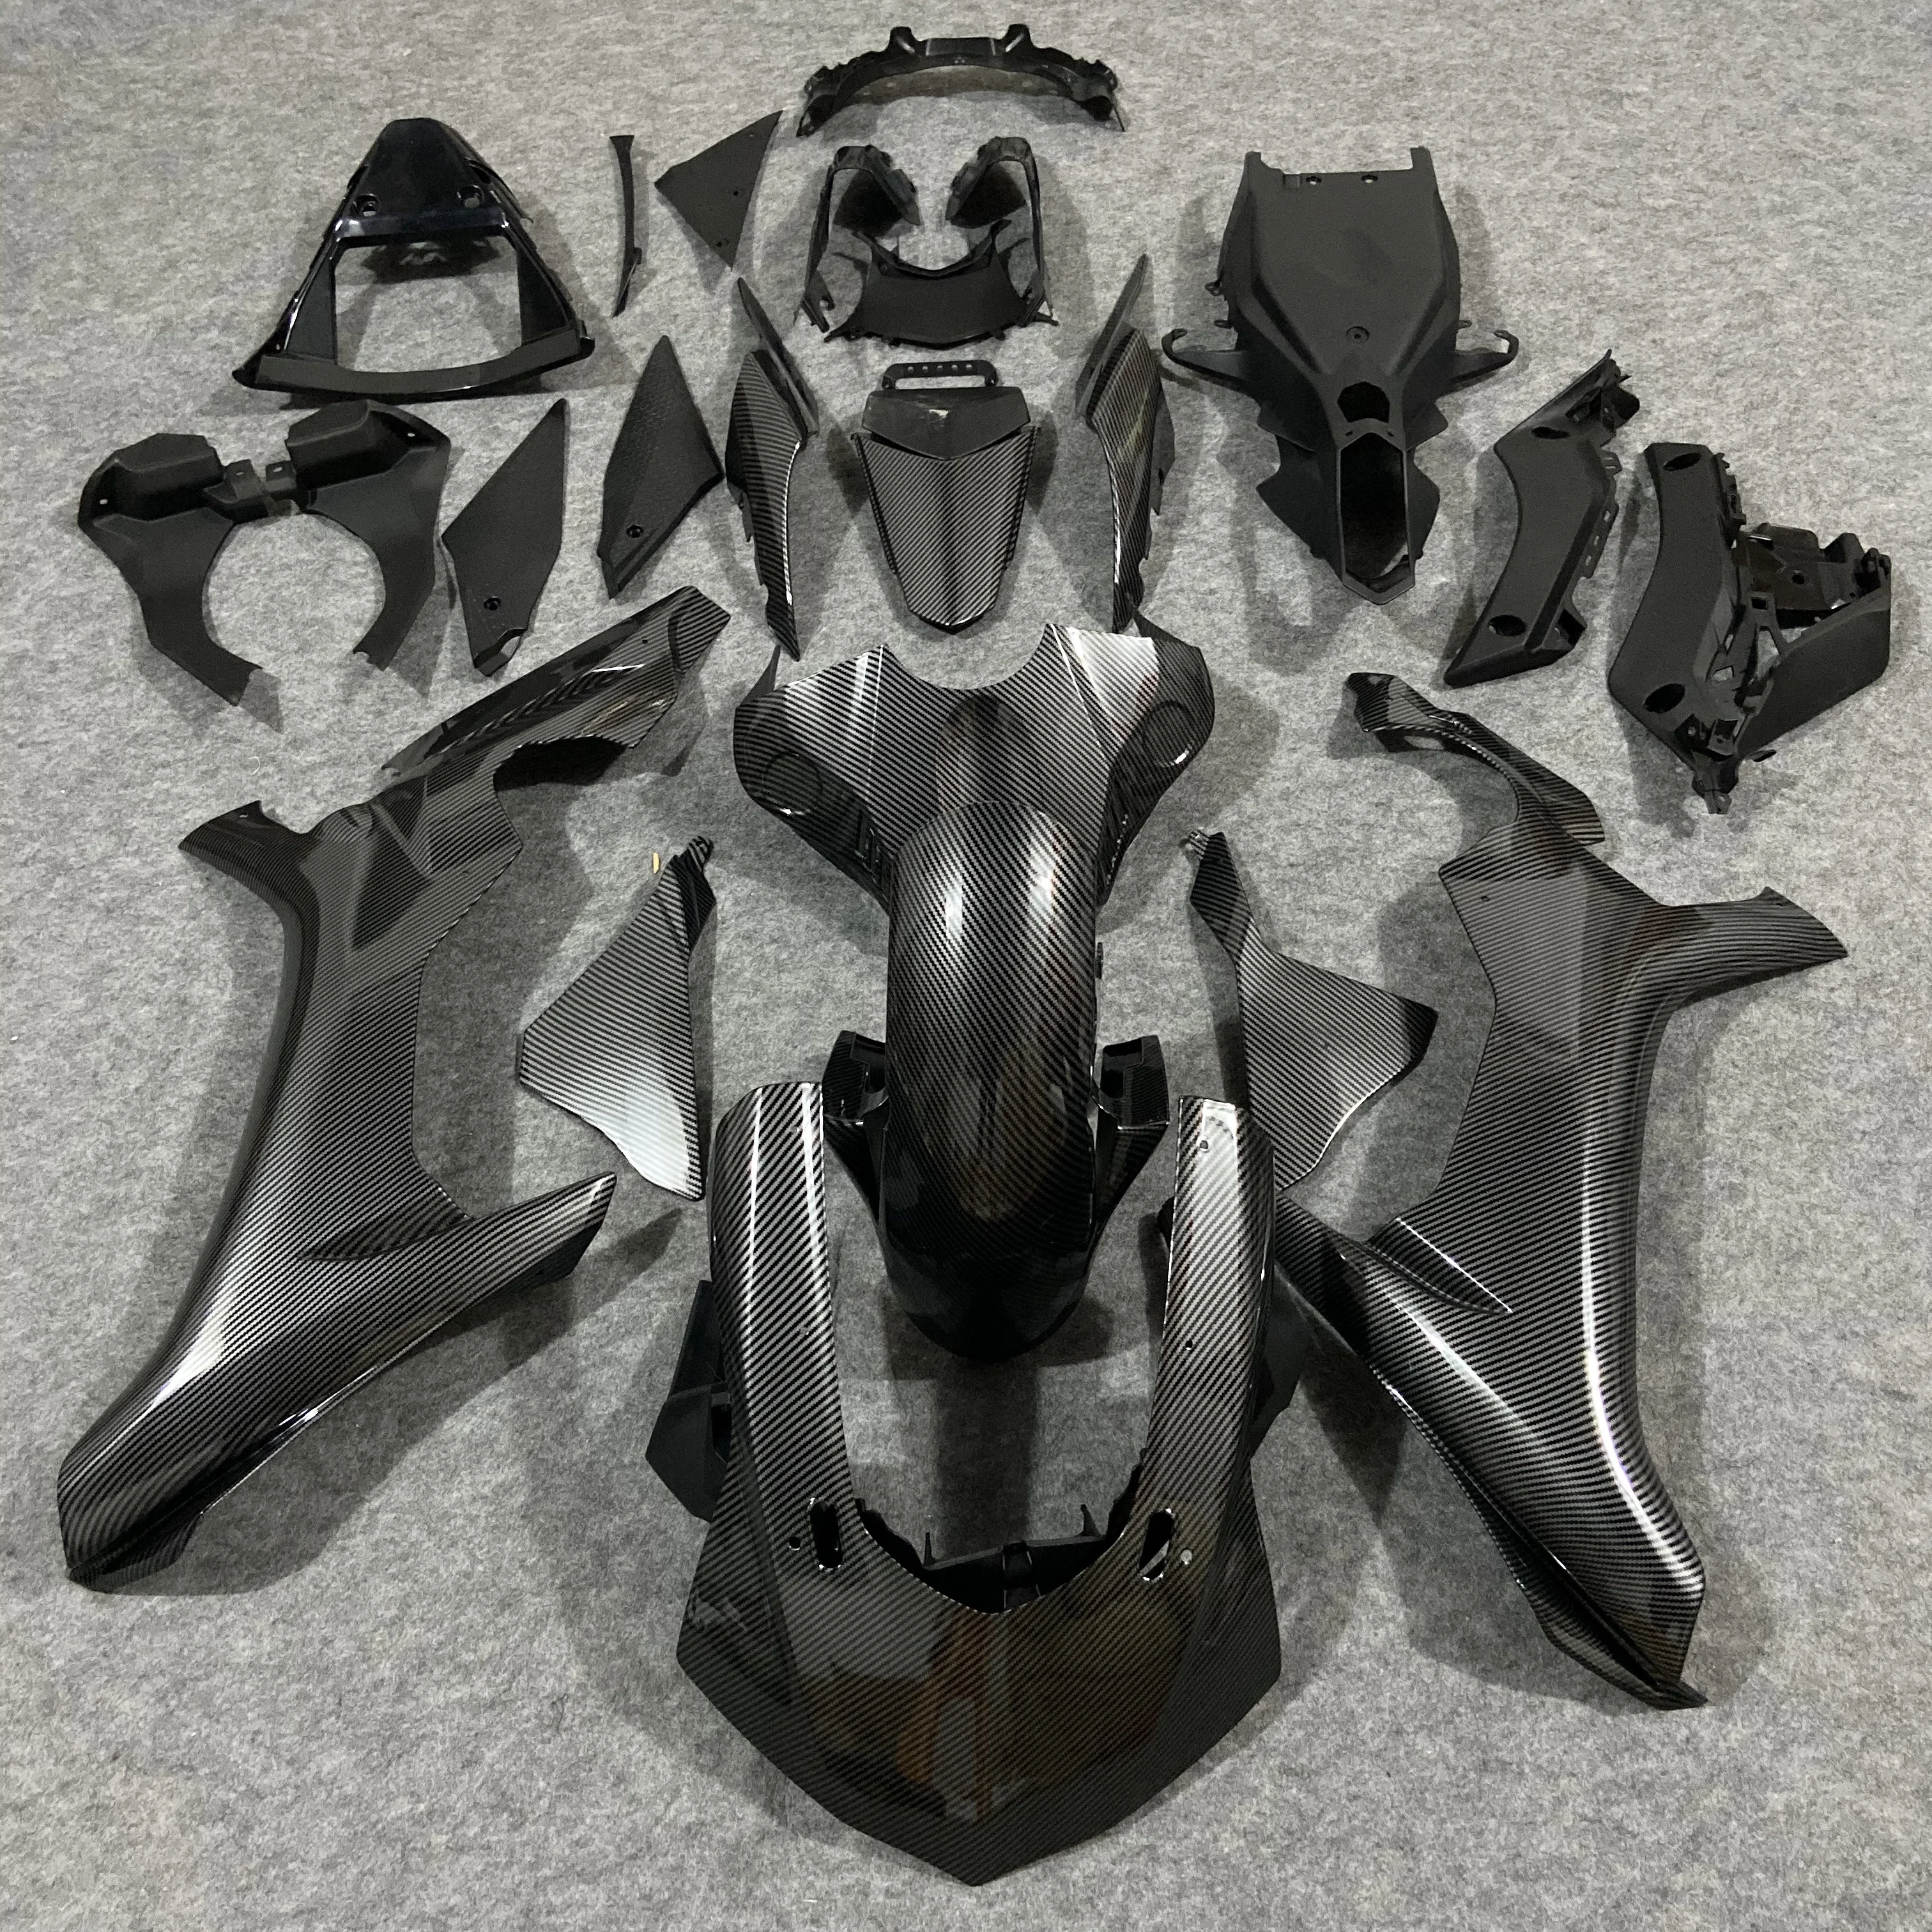 

2021 WHSC Band Painted With Best Carbon Fiber Motorcycle Parts For YAMAHA R1 2015-2018 ABS Injection Fairing Cover Custom Kits, Pictures shown